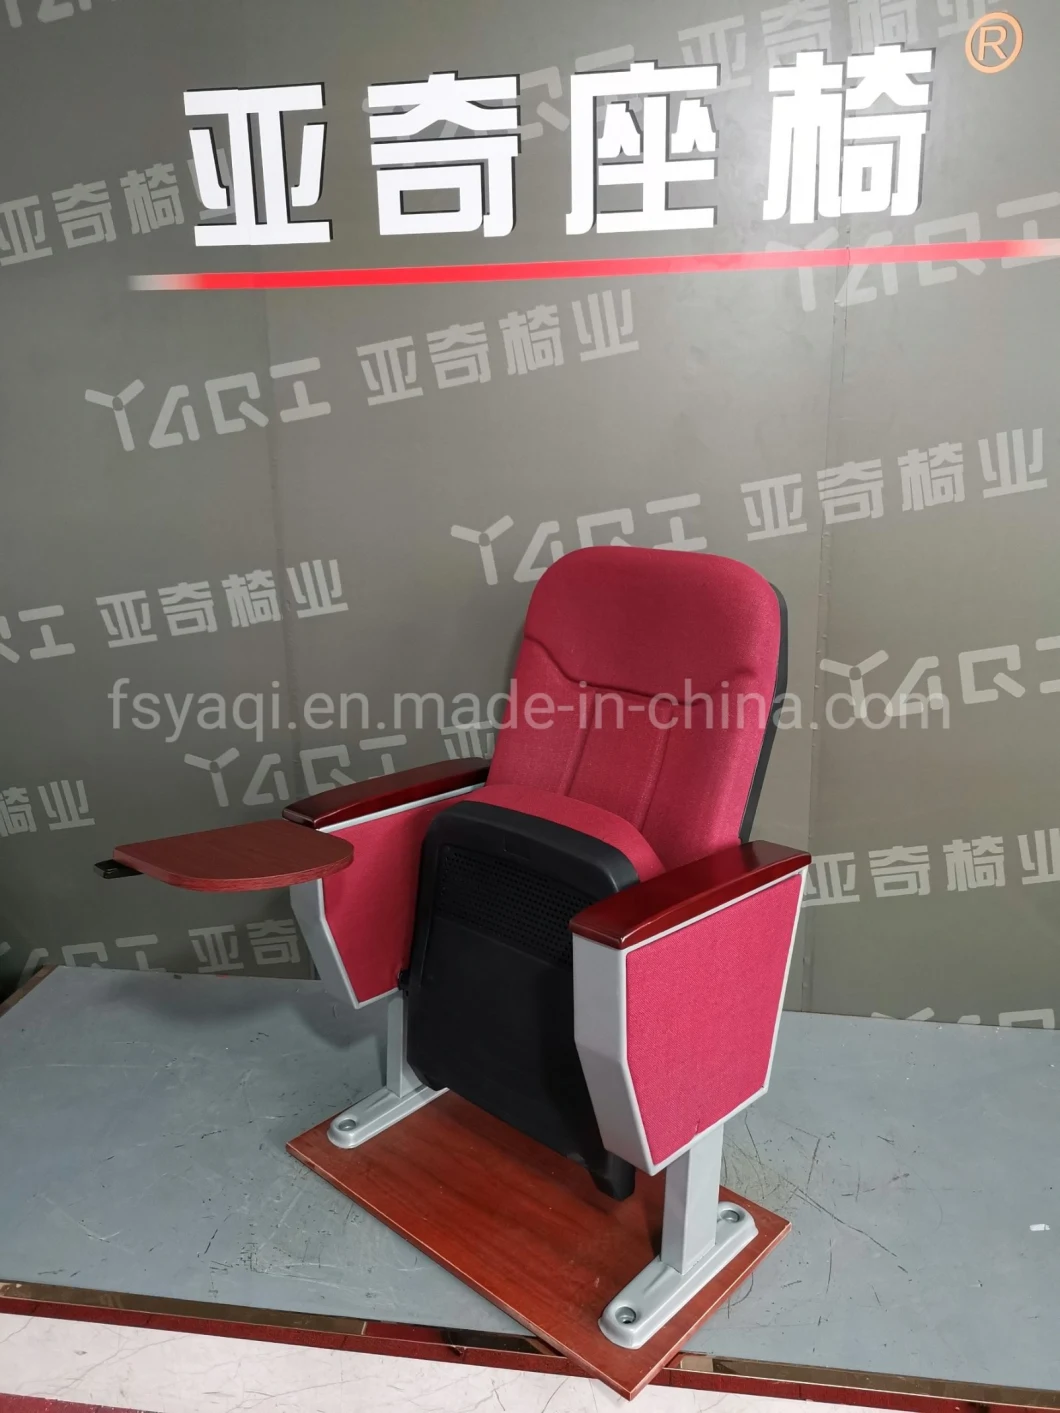 Auditorium Chairs Cinema Conference Chair Auditorium Seating Chairs (YA-L04)